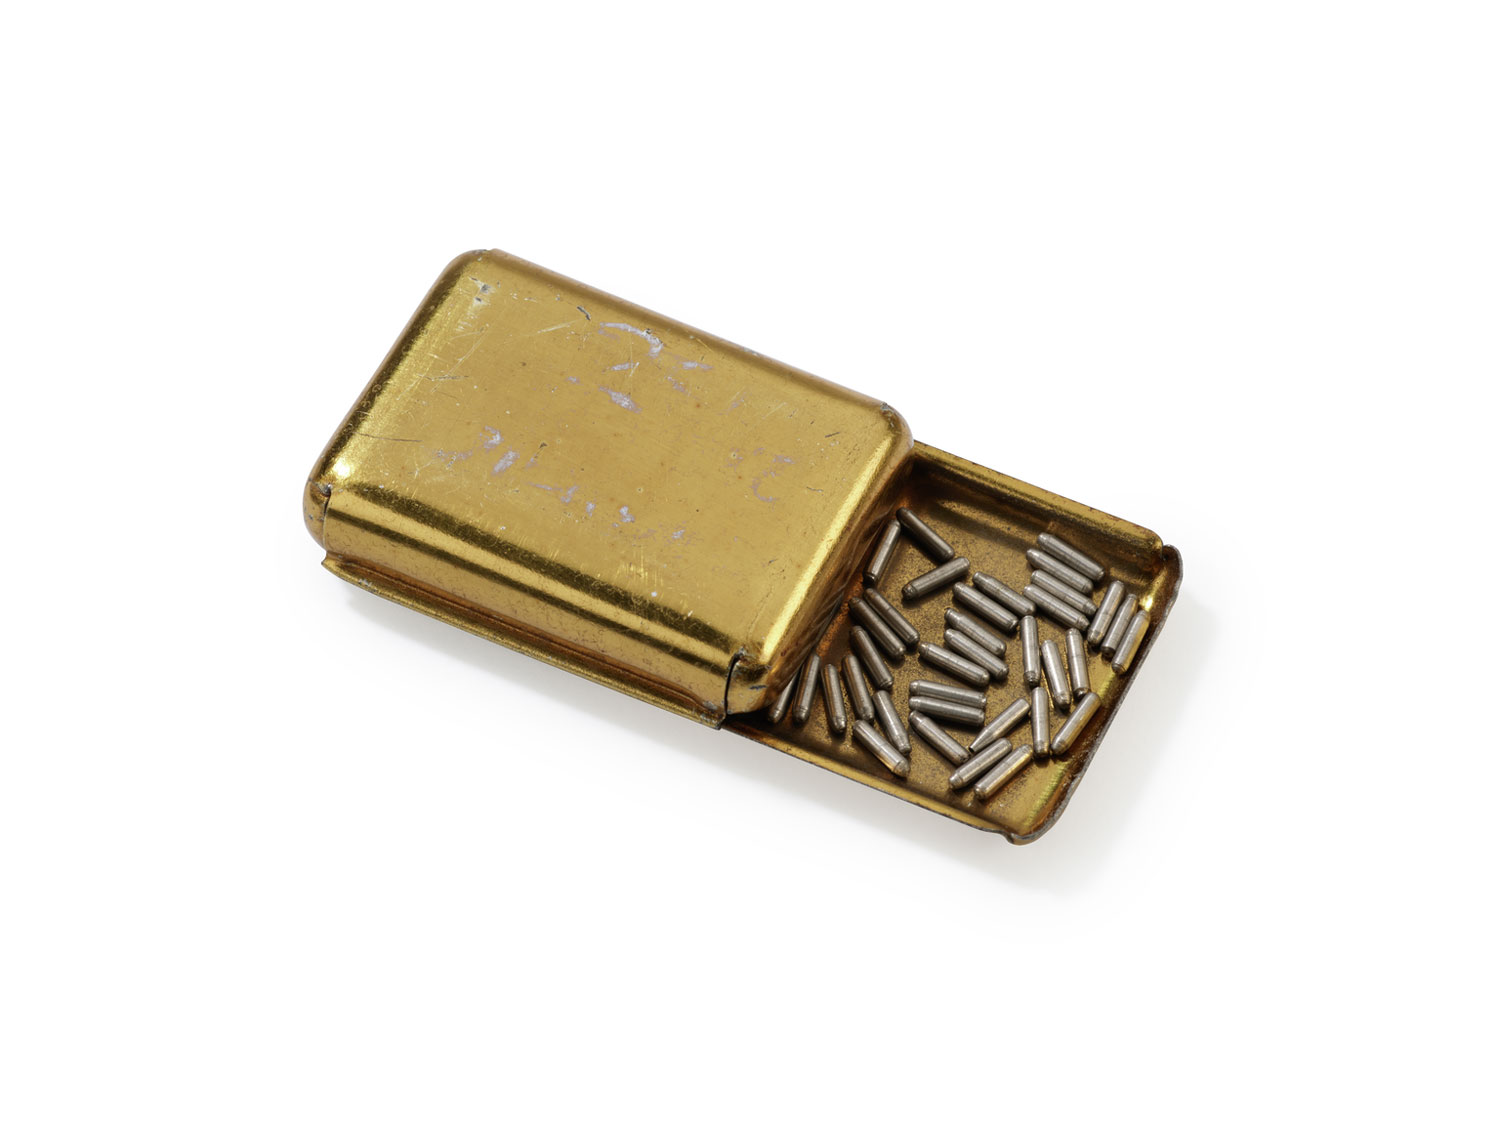 A small golden metal case with metal pellets inside